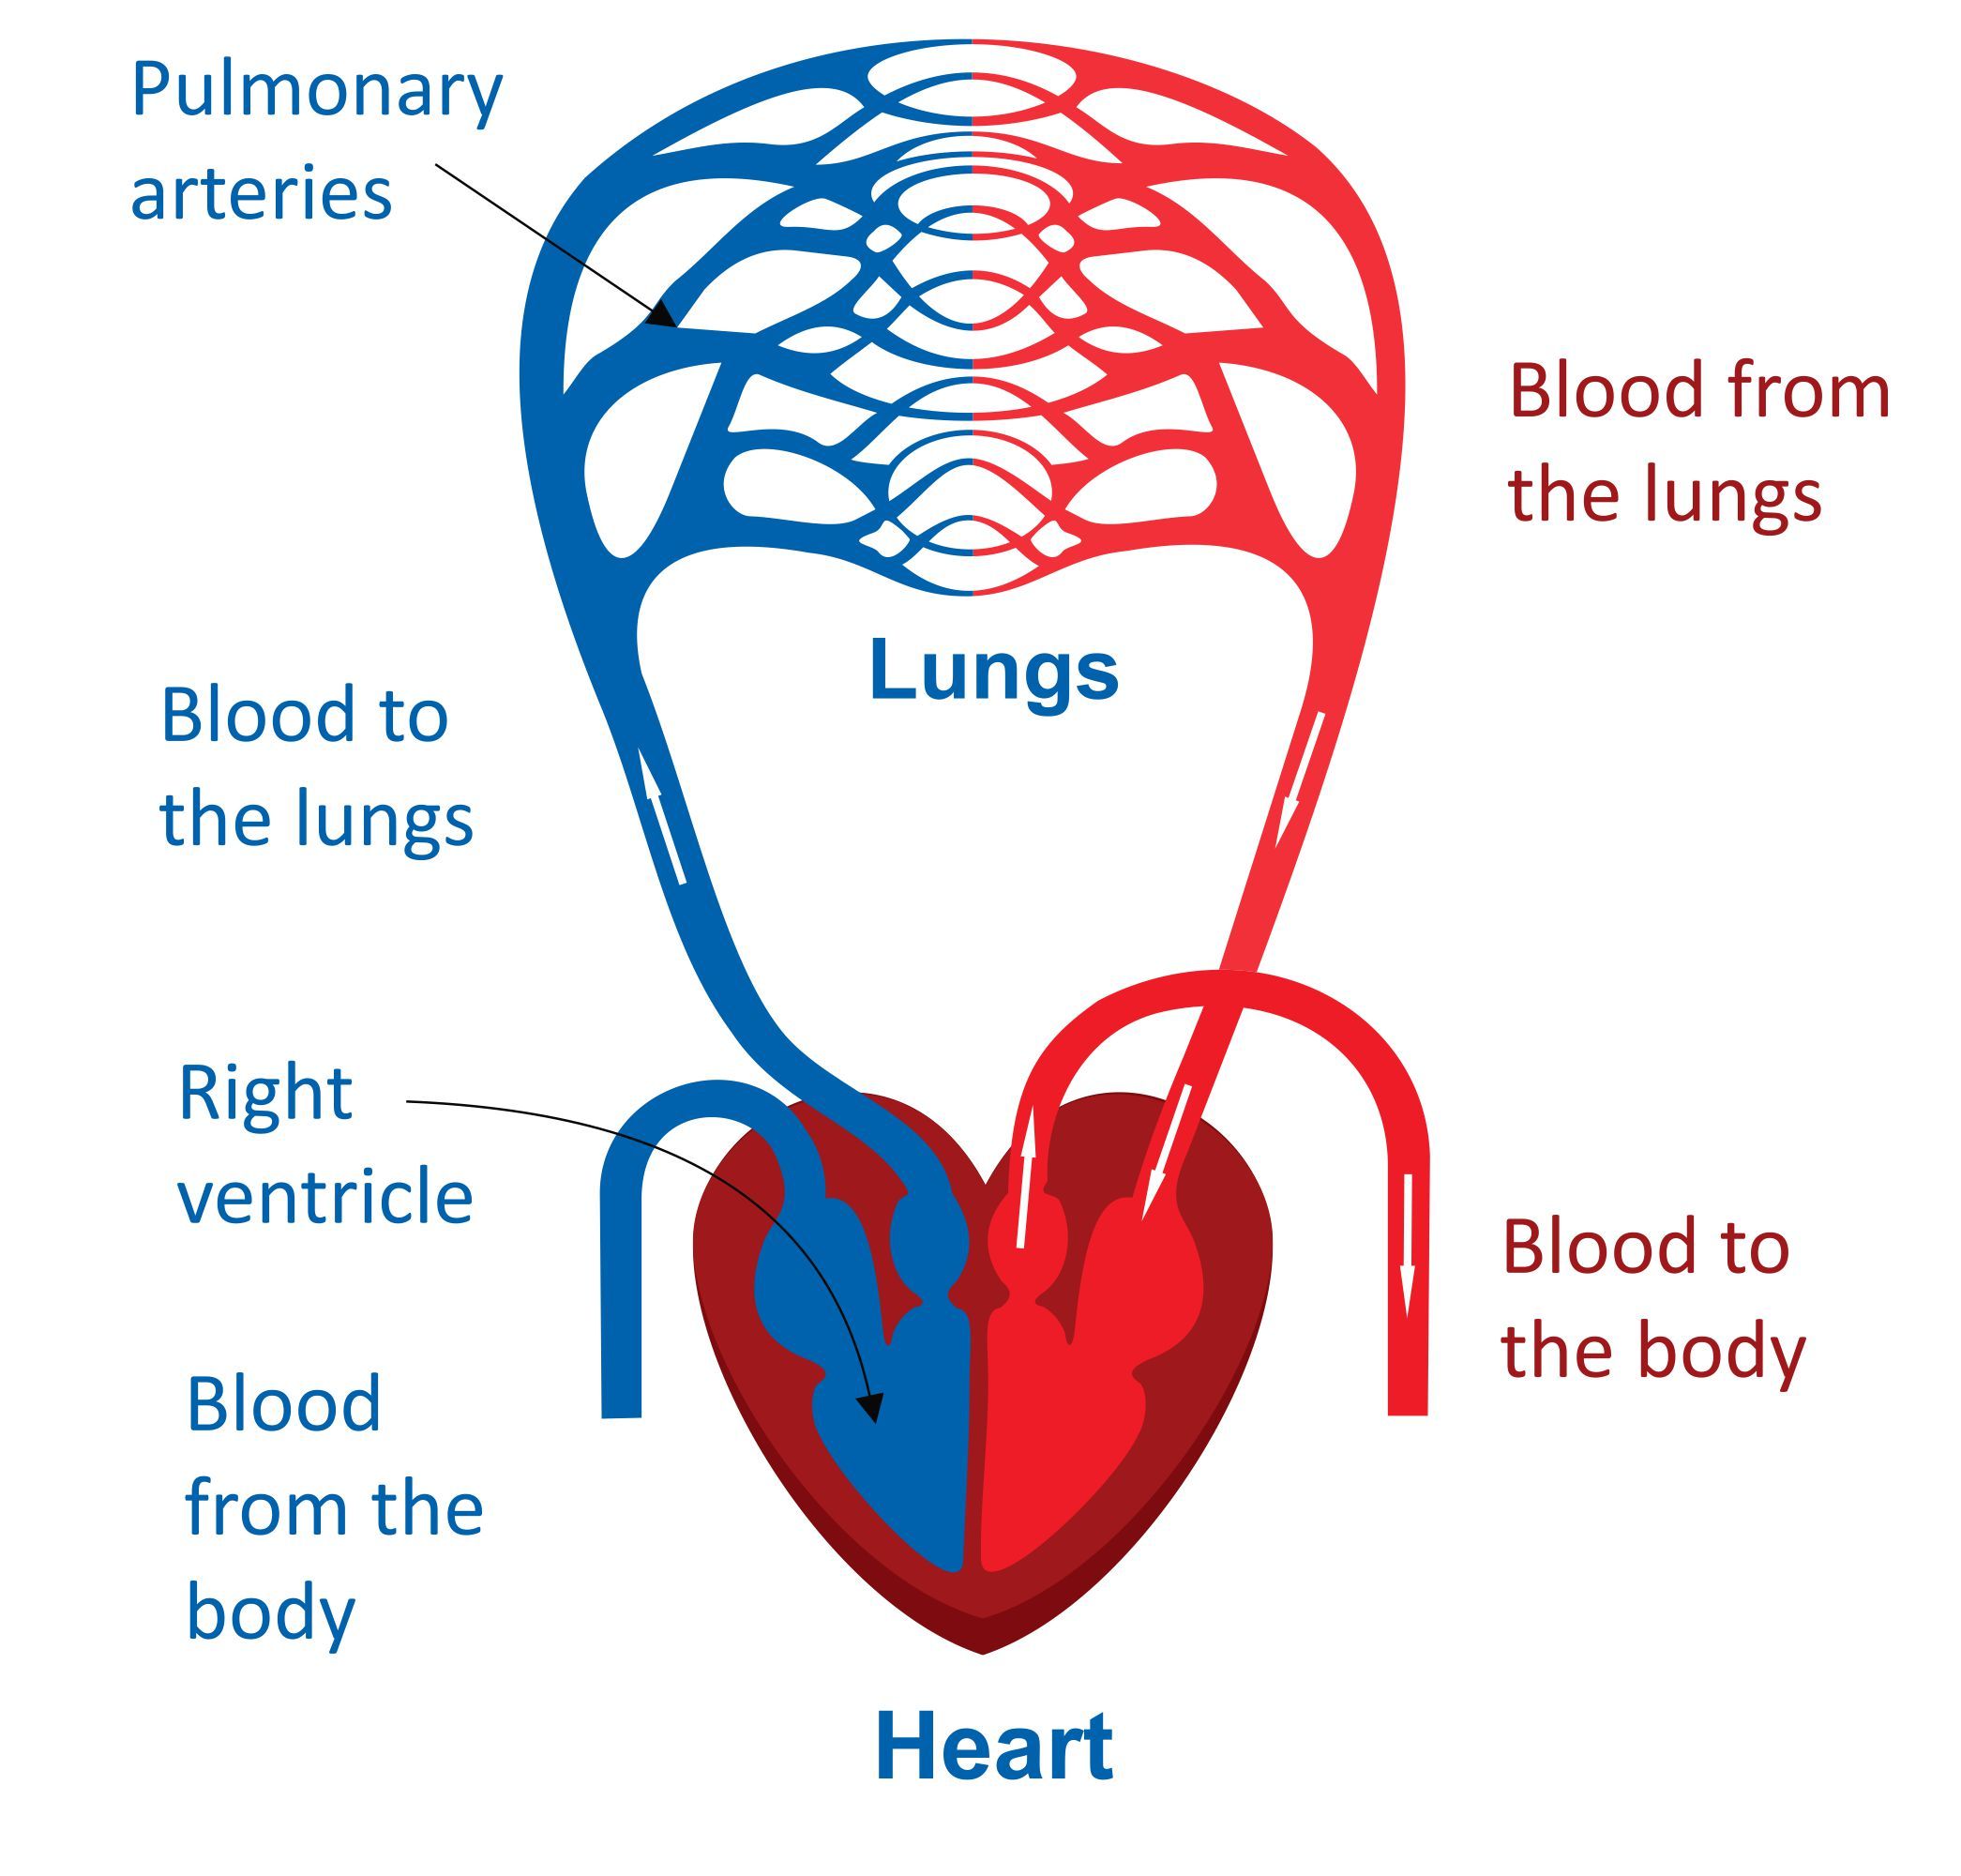 Circulatory system is divided into 3 parts, blood, heart and blood vessels